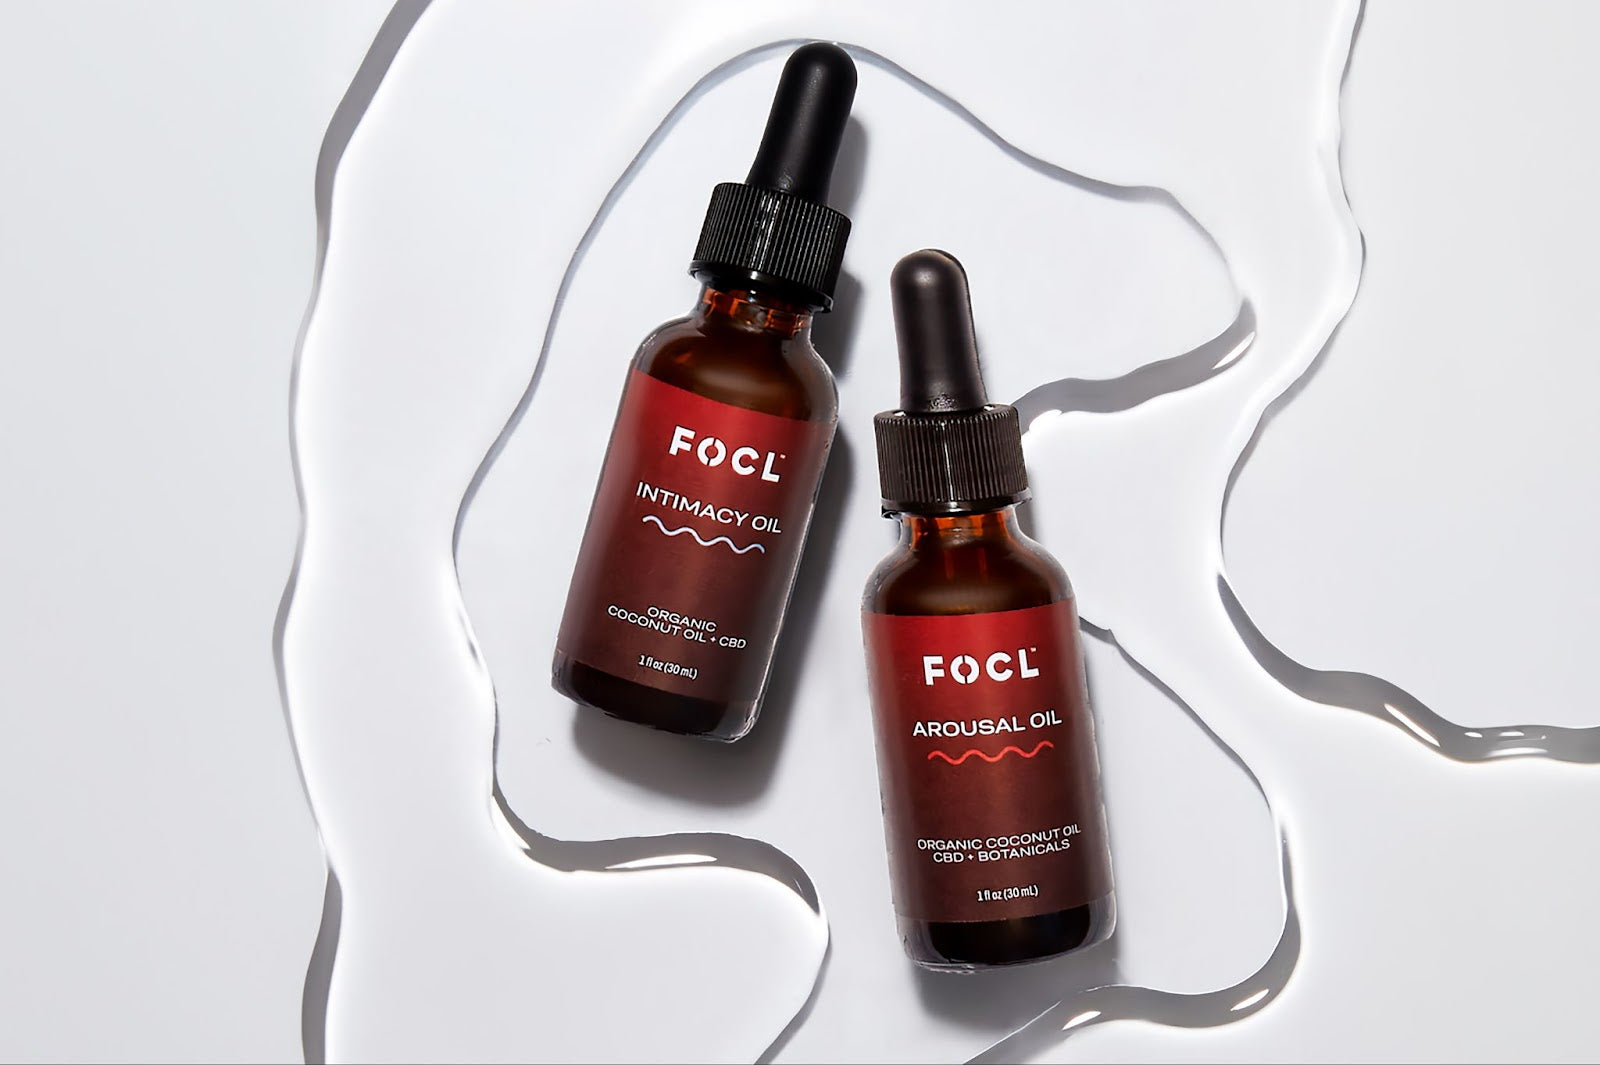 FOCL Intimacy Oil and Arousal Oil bottles